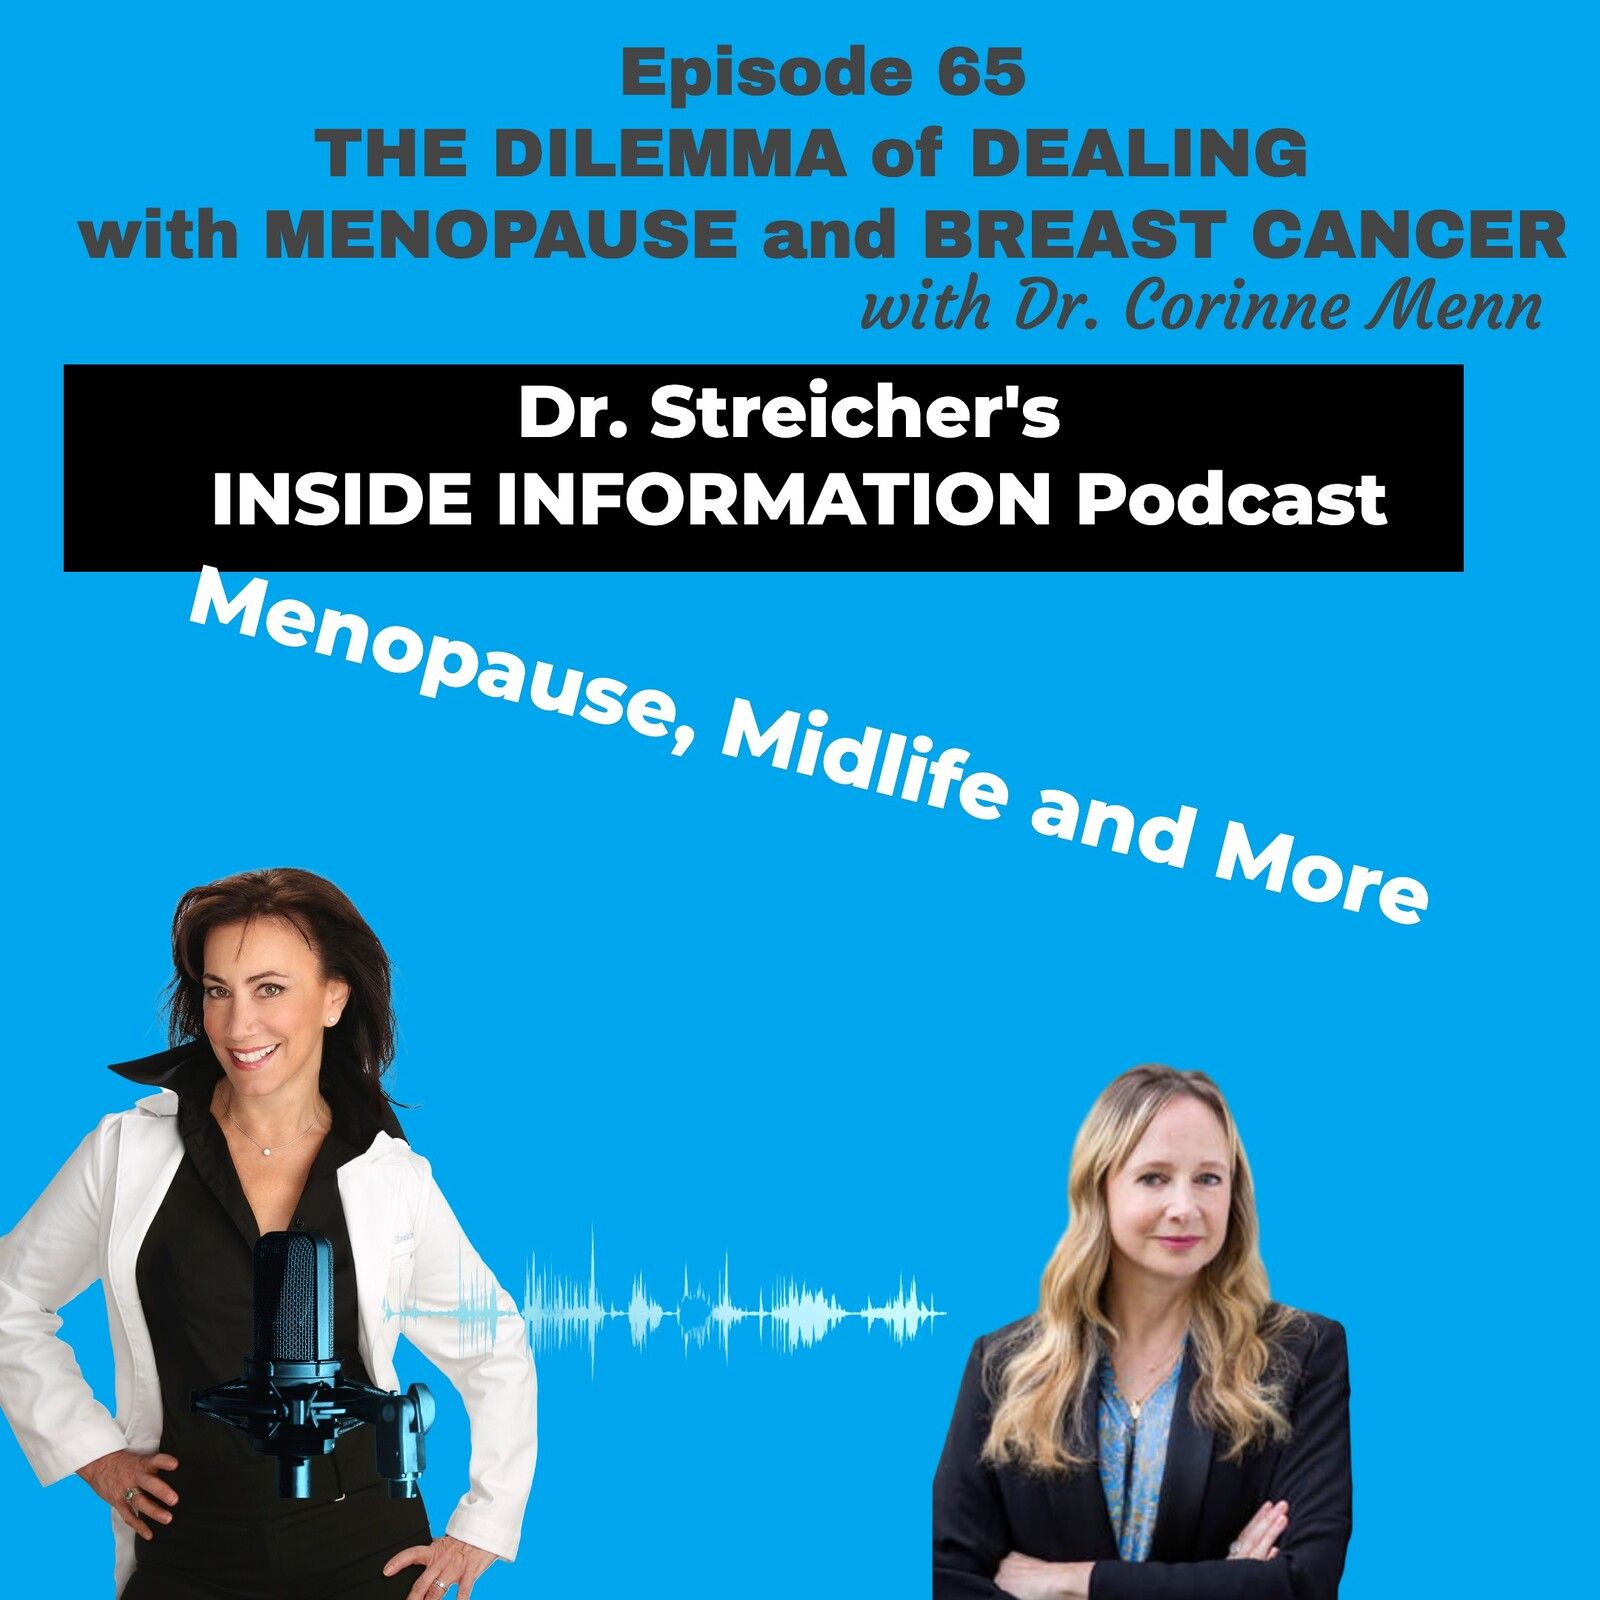 S1 Ep65: The Dilemma of Dealing with Menopause AND Breast Cancer with Dr. Corinne Menn